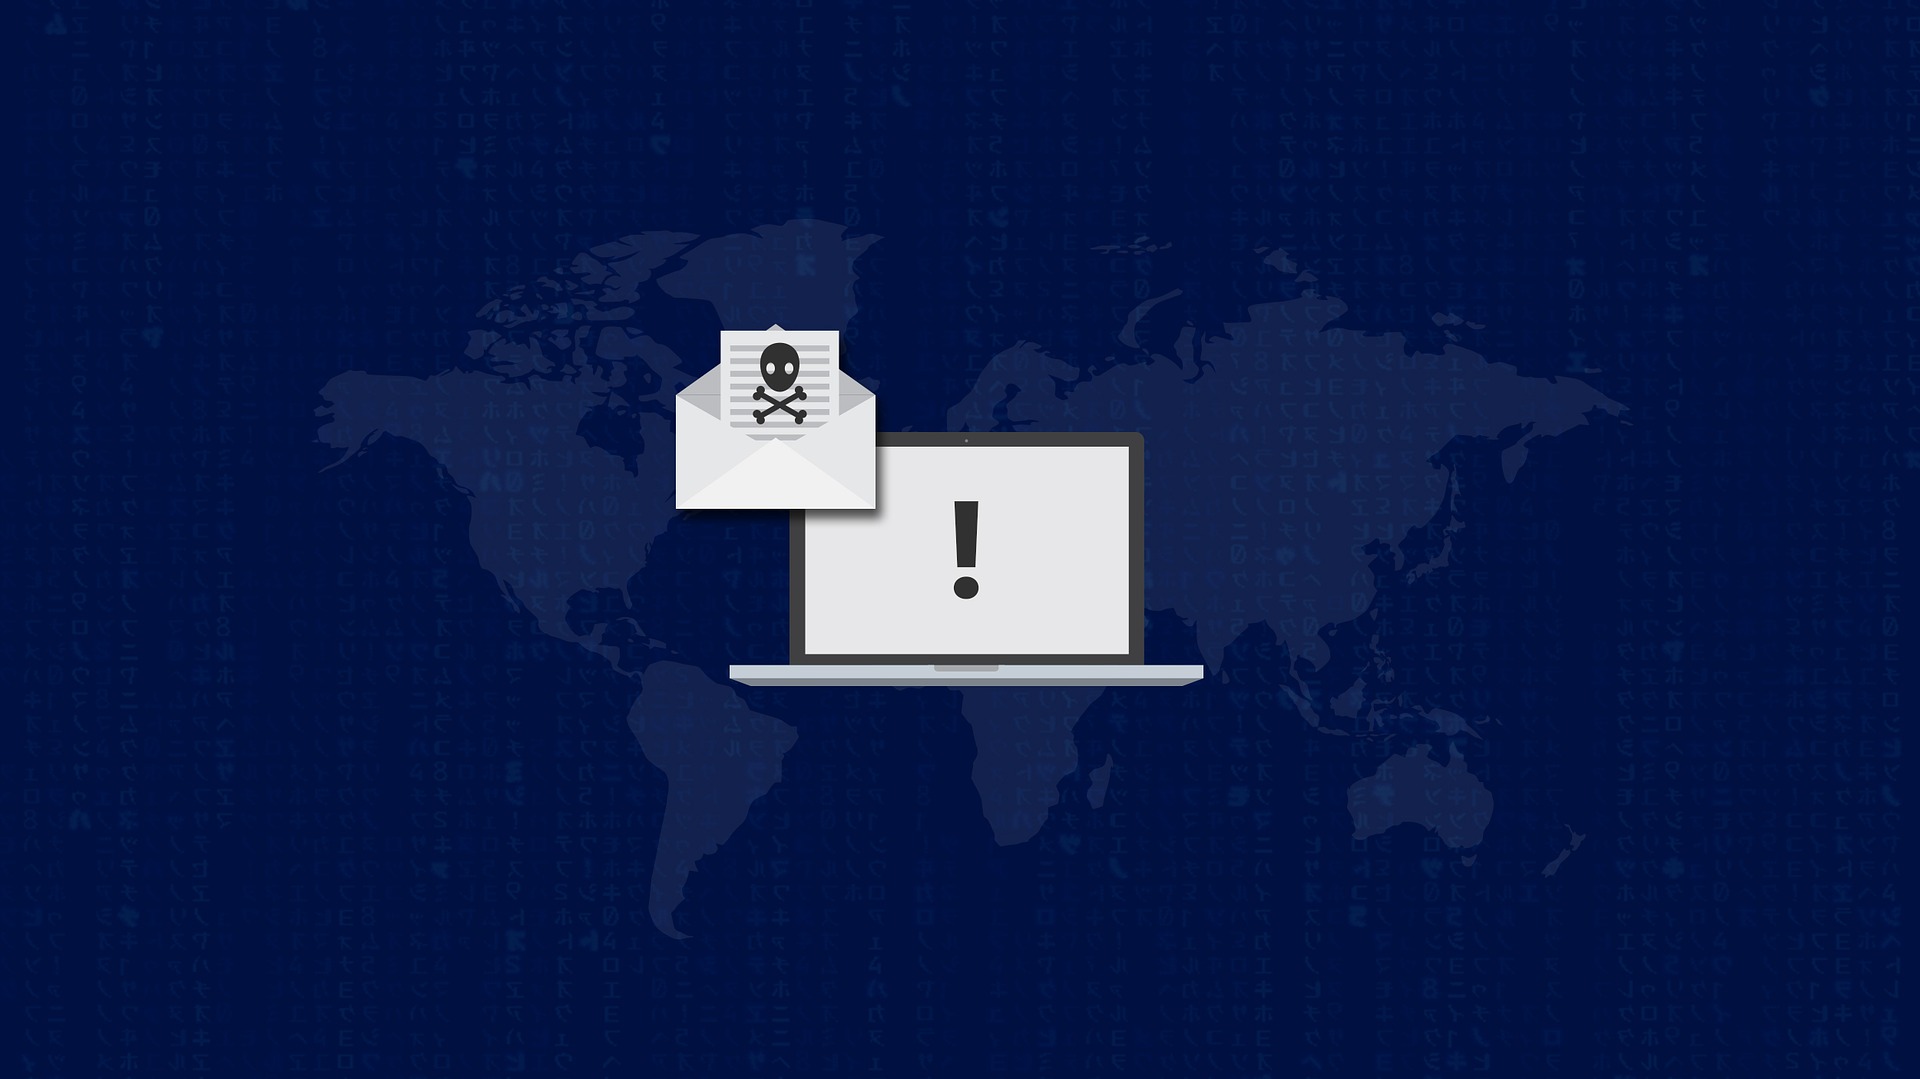 2022: The Year of Ransomware